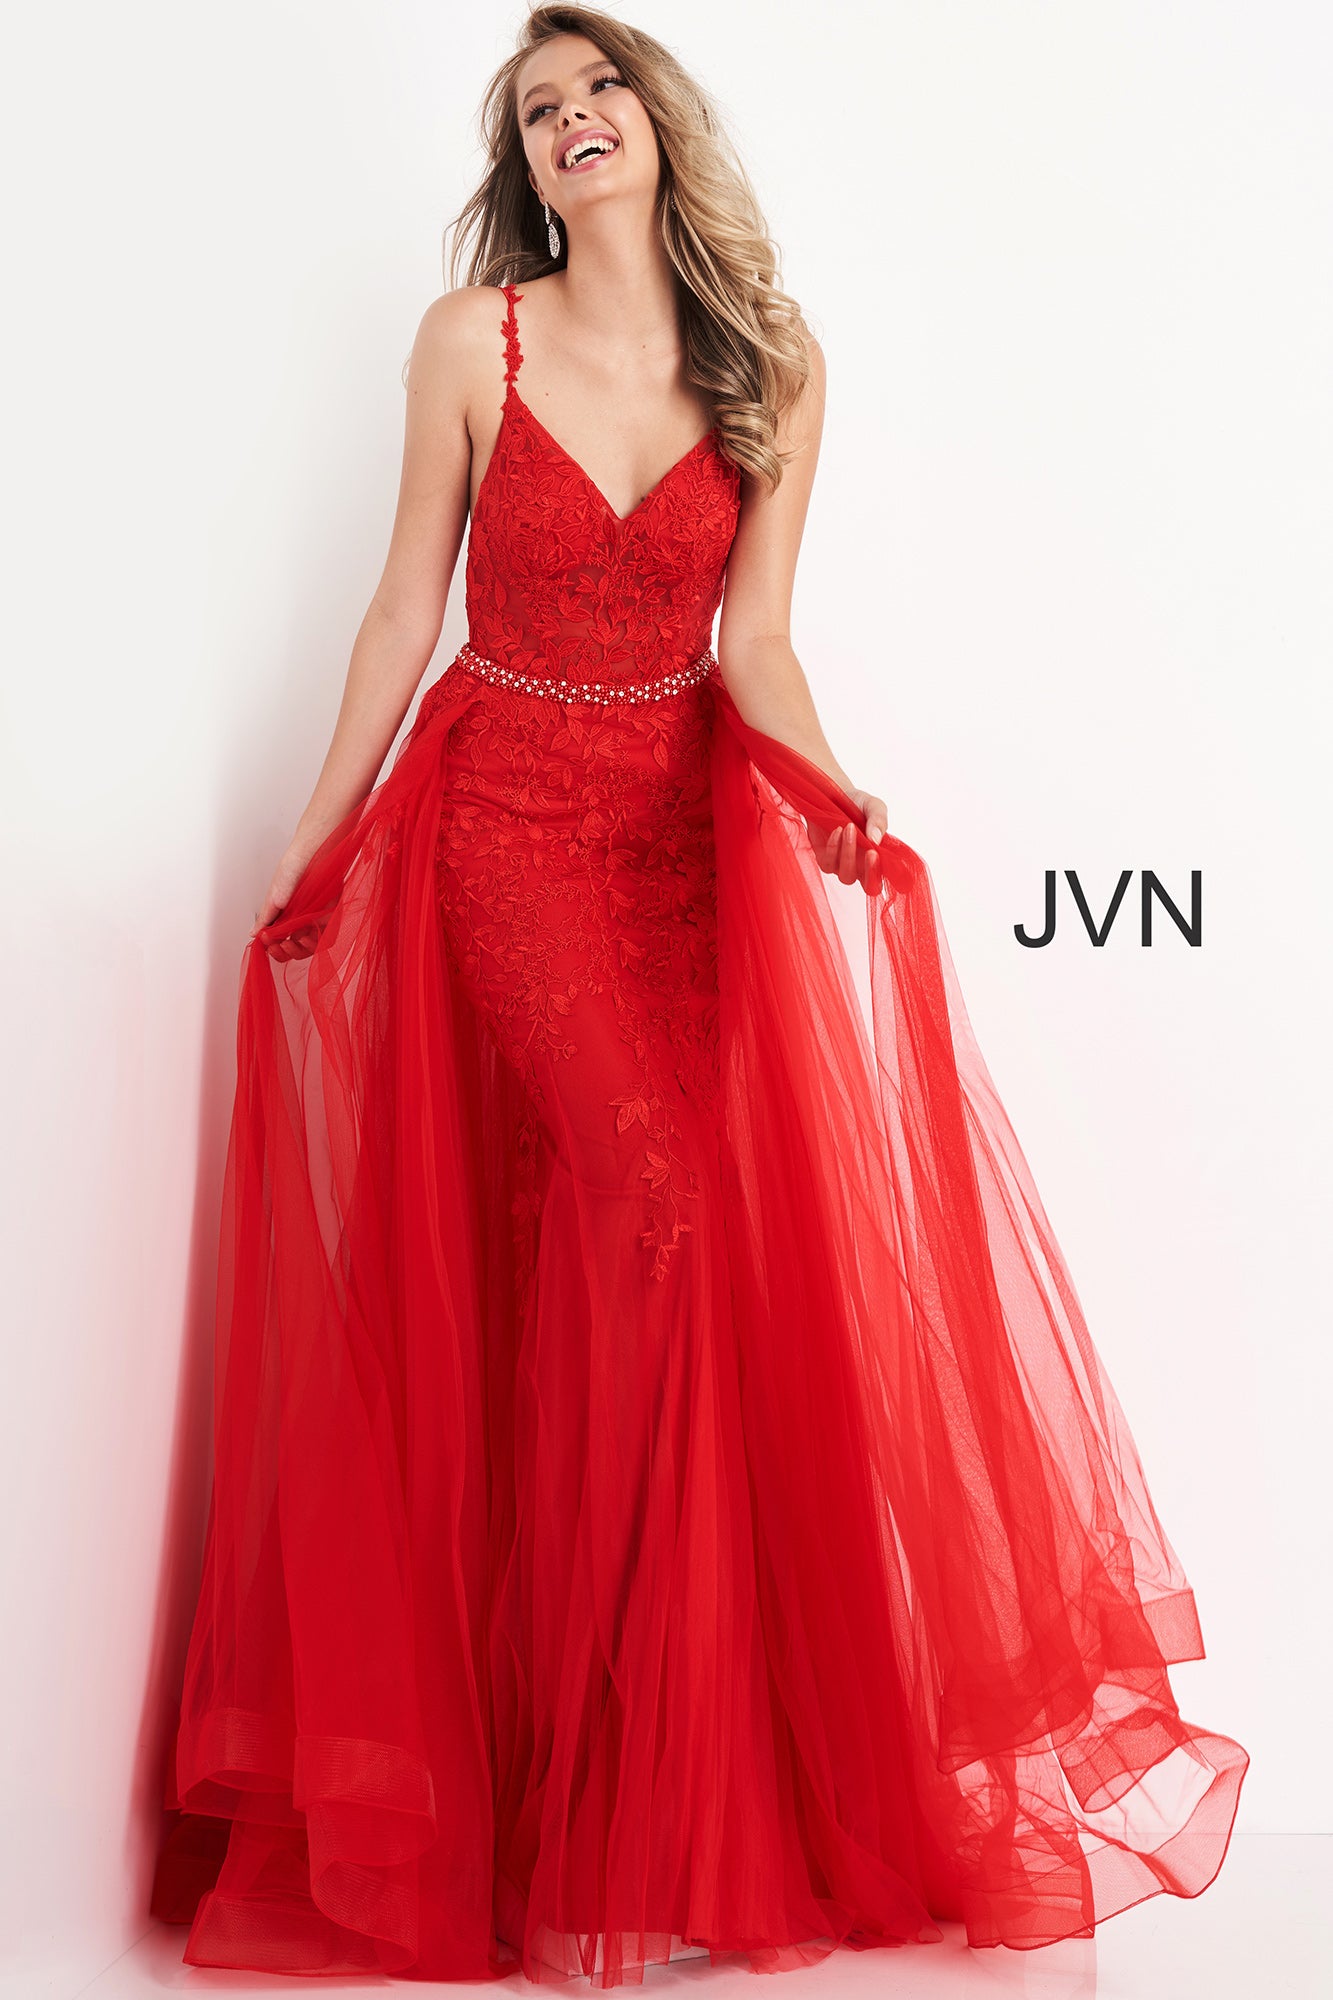 Jovani JVN02260 is a fitted Long Lace Prom Dress with a Tulle Overlay with a Crystal Embellished Waist Belt. Sheer Lace Bodice. Lace Spaghetti Straps Fitted Mermaid Flared Inner formal dress. Lace Scallop straps. Crystal beaded waist band. Prom Dresses Formal Evening gowns pageant dresses Size 10 In Off white for wedding dress or bridal gown  Available Sizes: 10  Colors: off-white  JVN by Jovani 02260